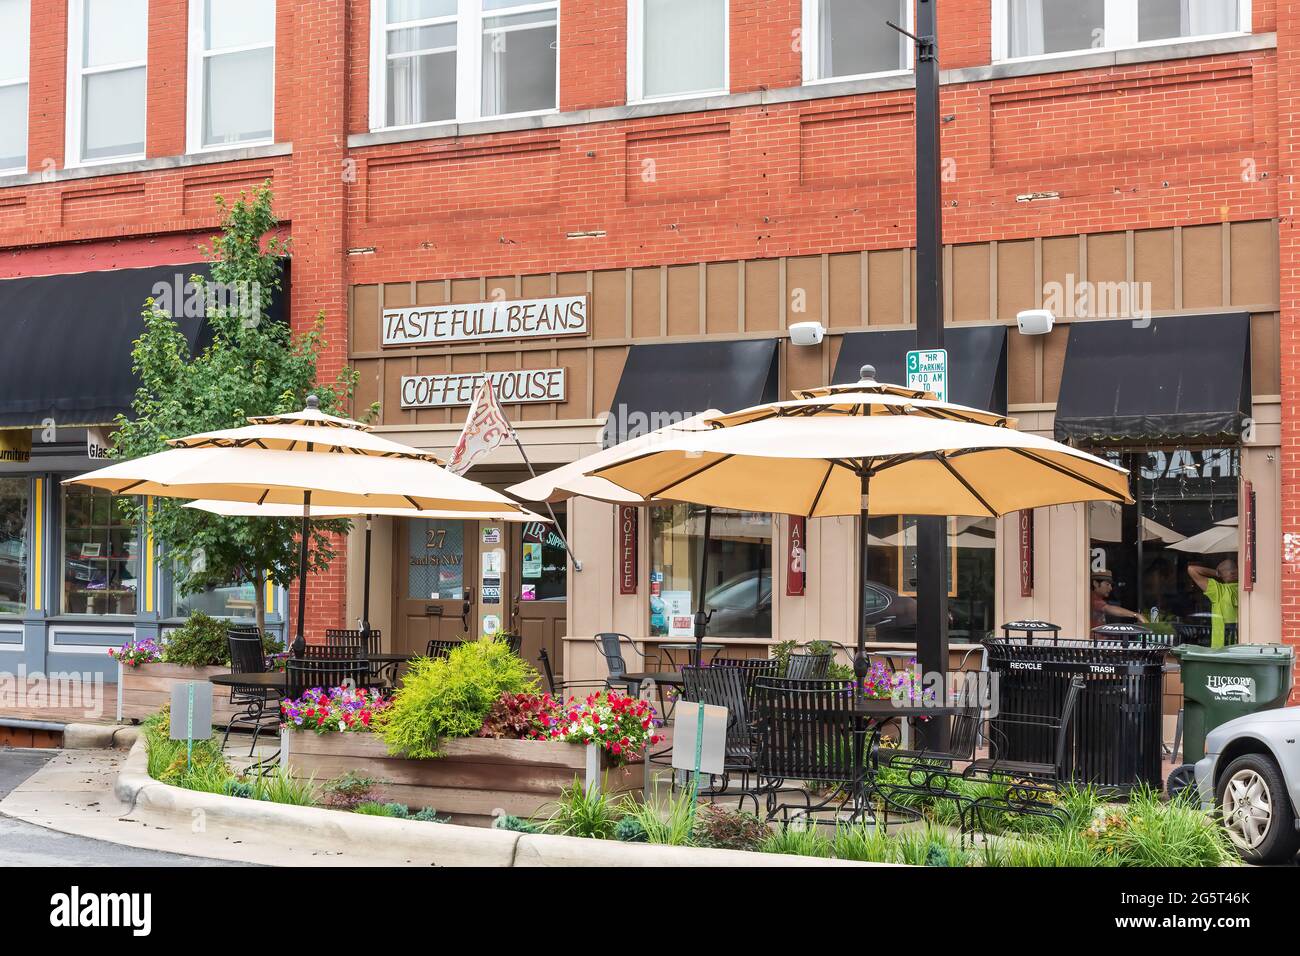 HICKORY, NC, USA-22 JUNE 2021: Front diagonal view of Taste Full Beans Coffeehouse, with colorful flowers and greenery surrounding sidewalk tables. Stock Photo